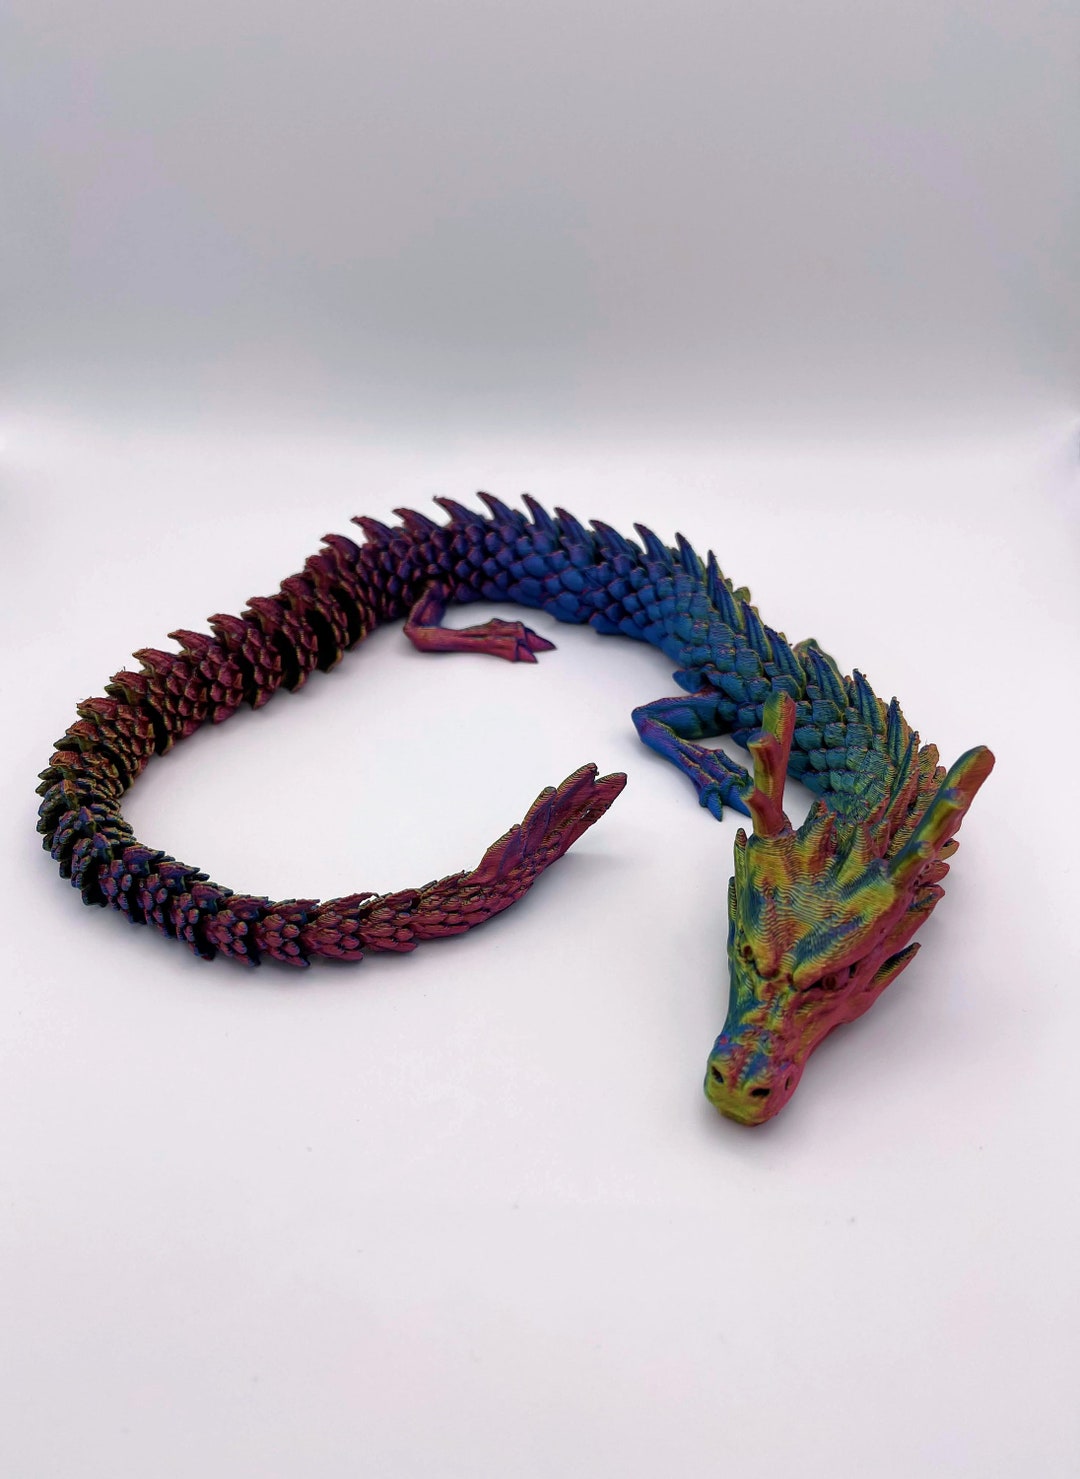 3D Printed Articulated Dragon - Etsy